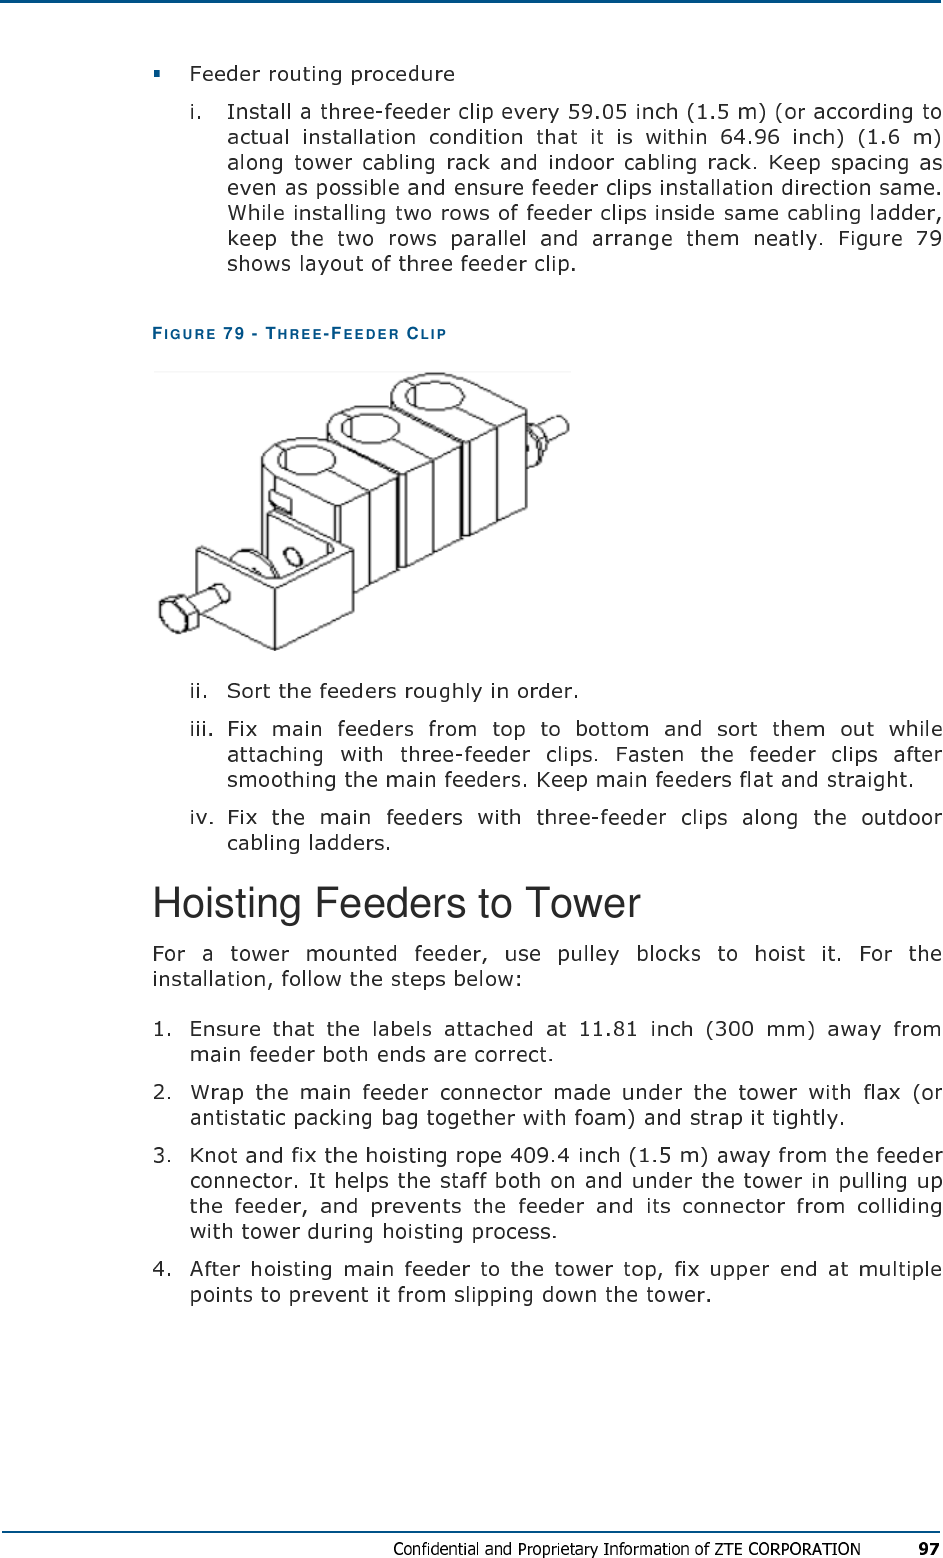   FIG U R E   79 - TH R E E -FEE DE R  CL I P      Hoisting Feeders to Tower     